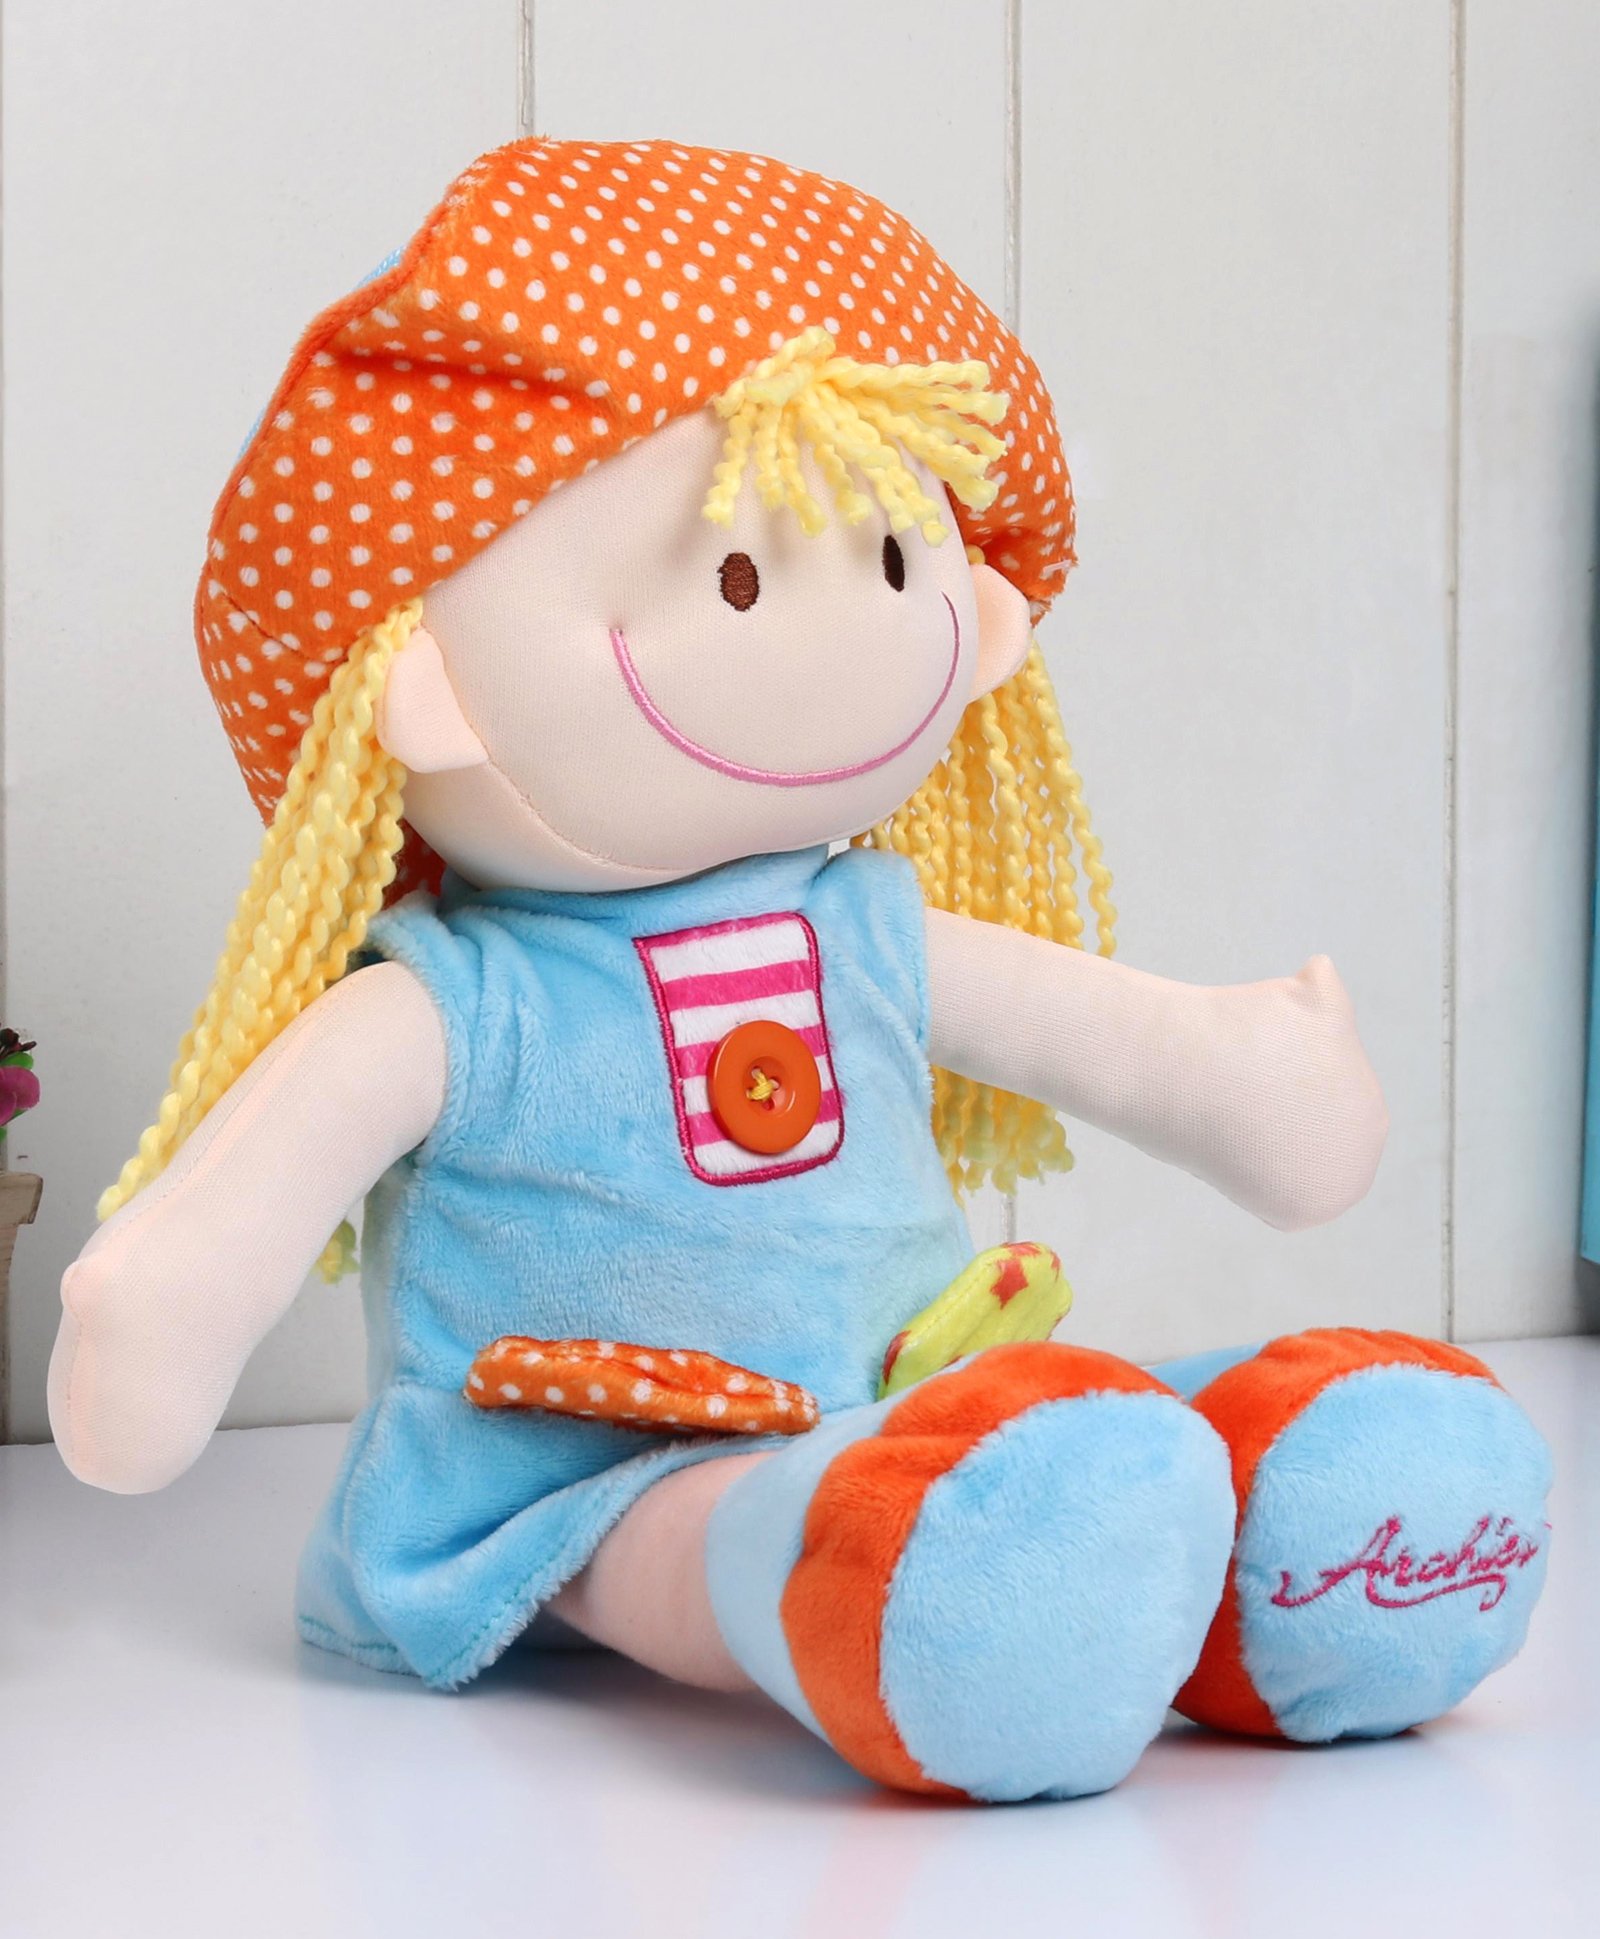 jerry soft toy archies